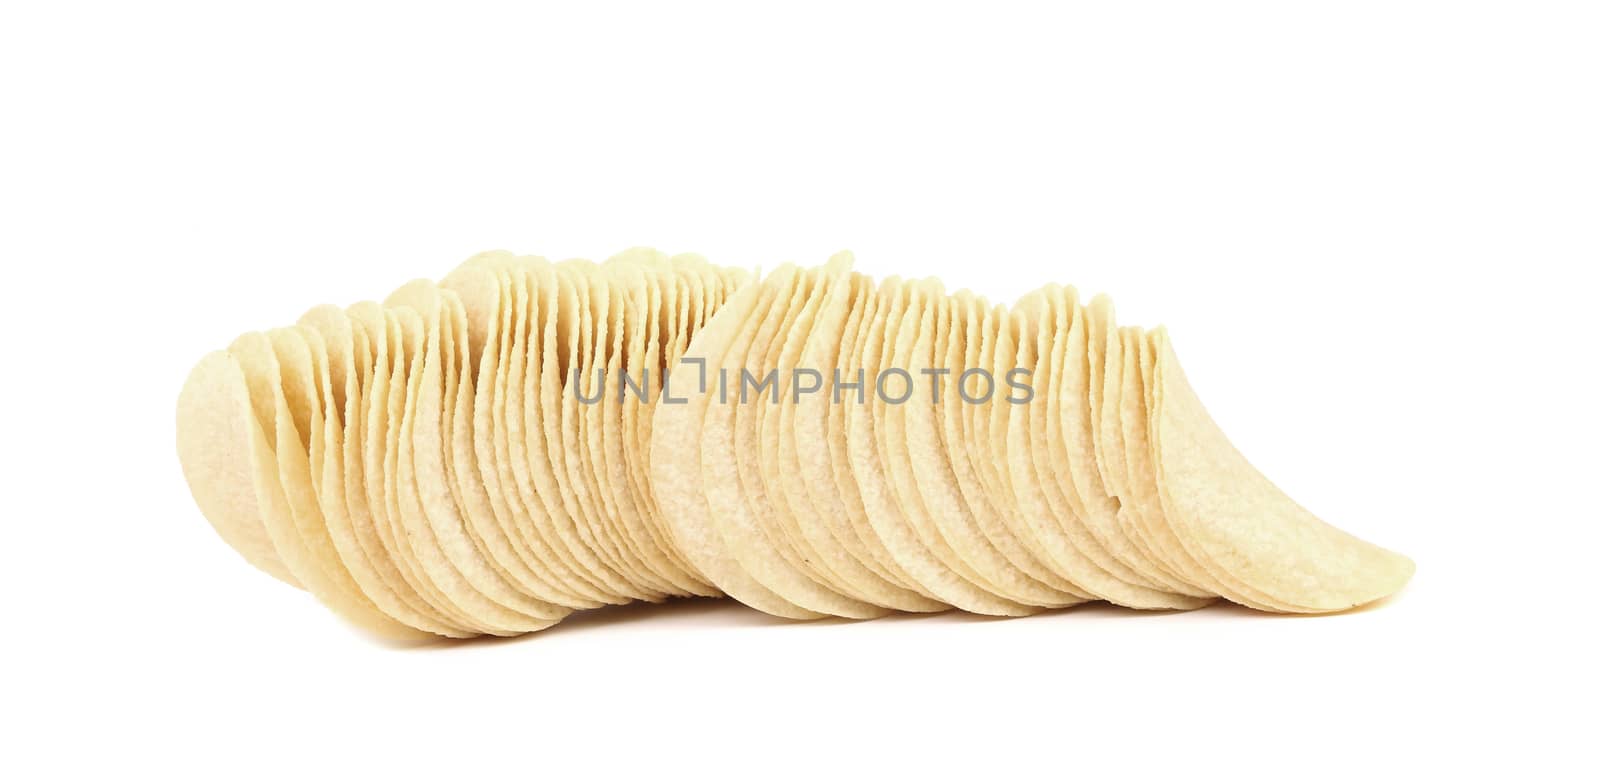 Stack of potato chips. Horisontal. Isolated on a white background. Place for text.